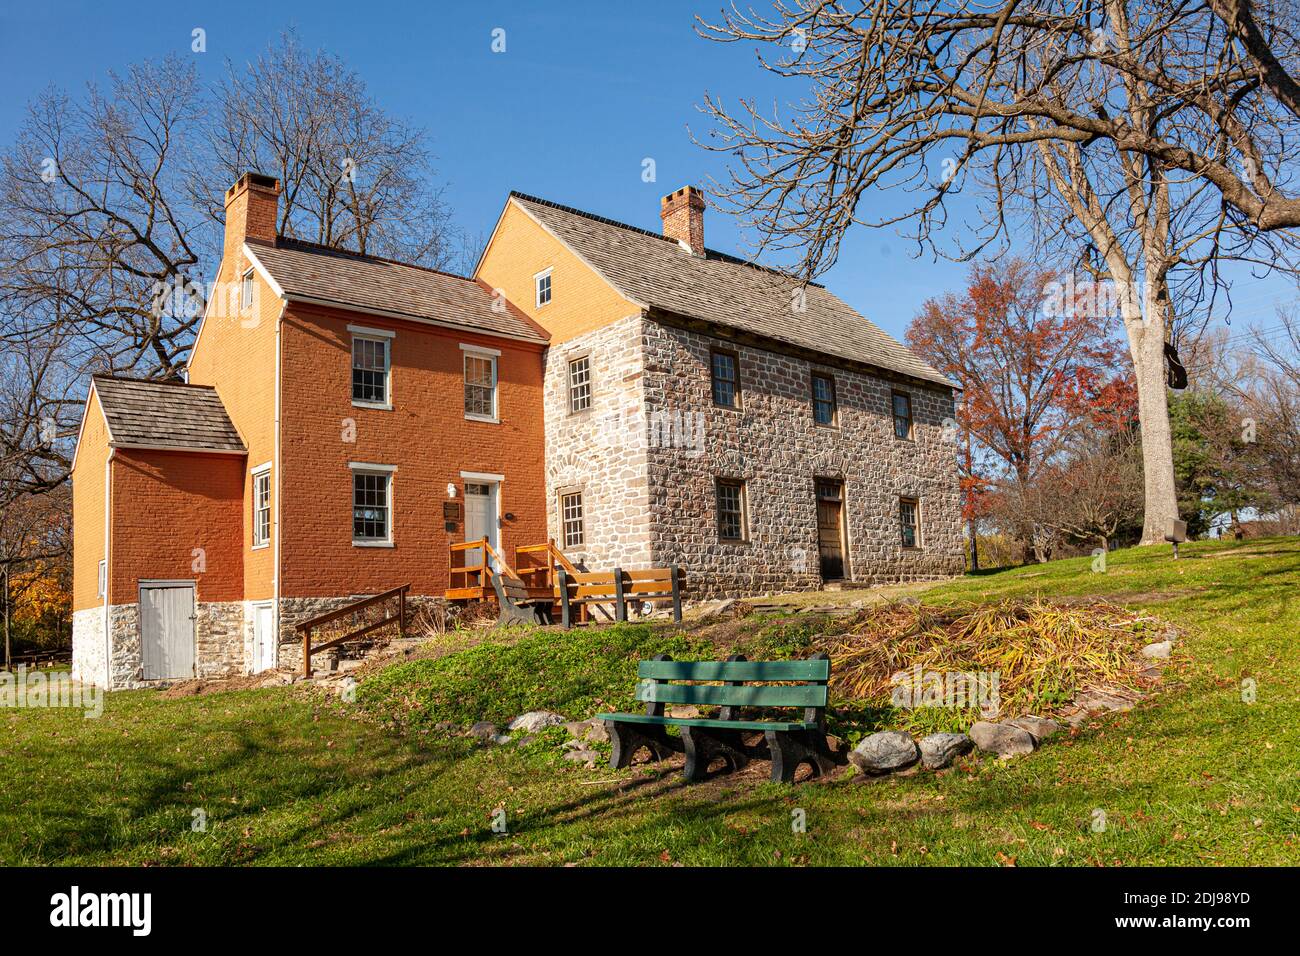 Built in 1758 in Frederick Maryland, Schifferstadt House (now serving as an Architectural museum) is the oldest building in the city and is among the Stock Photo